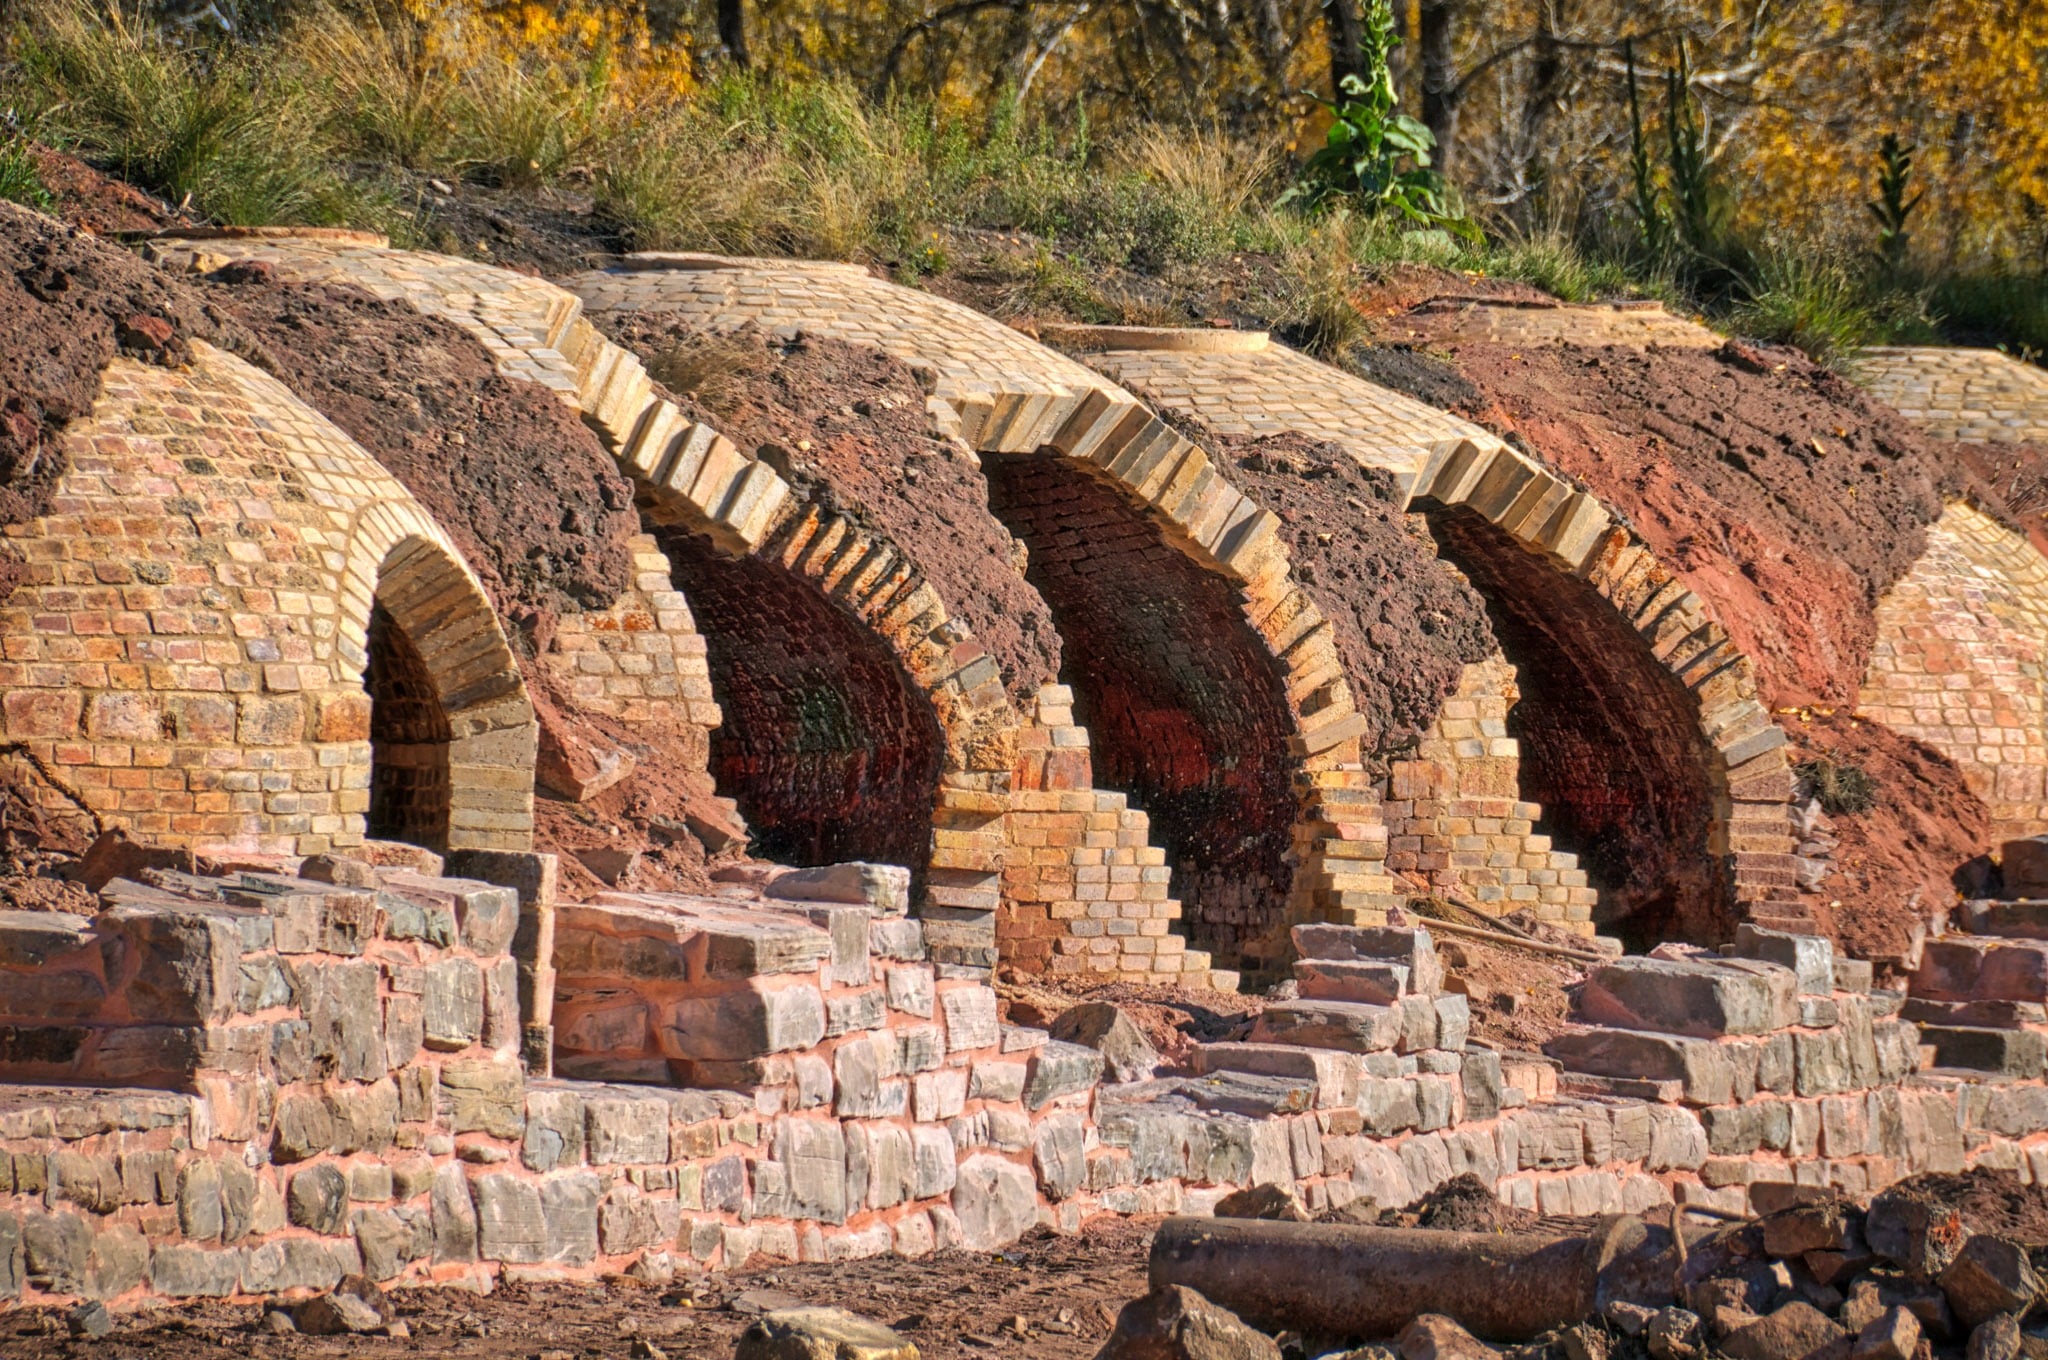 These ovens at the end of the line are not fully restored. They are located in Redstone, Colorado, and were used to reduce coal, mined nearby, to coke that was used in steel smelting.